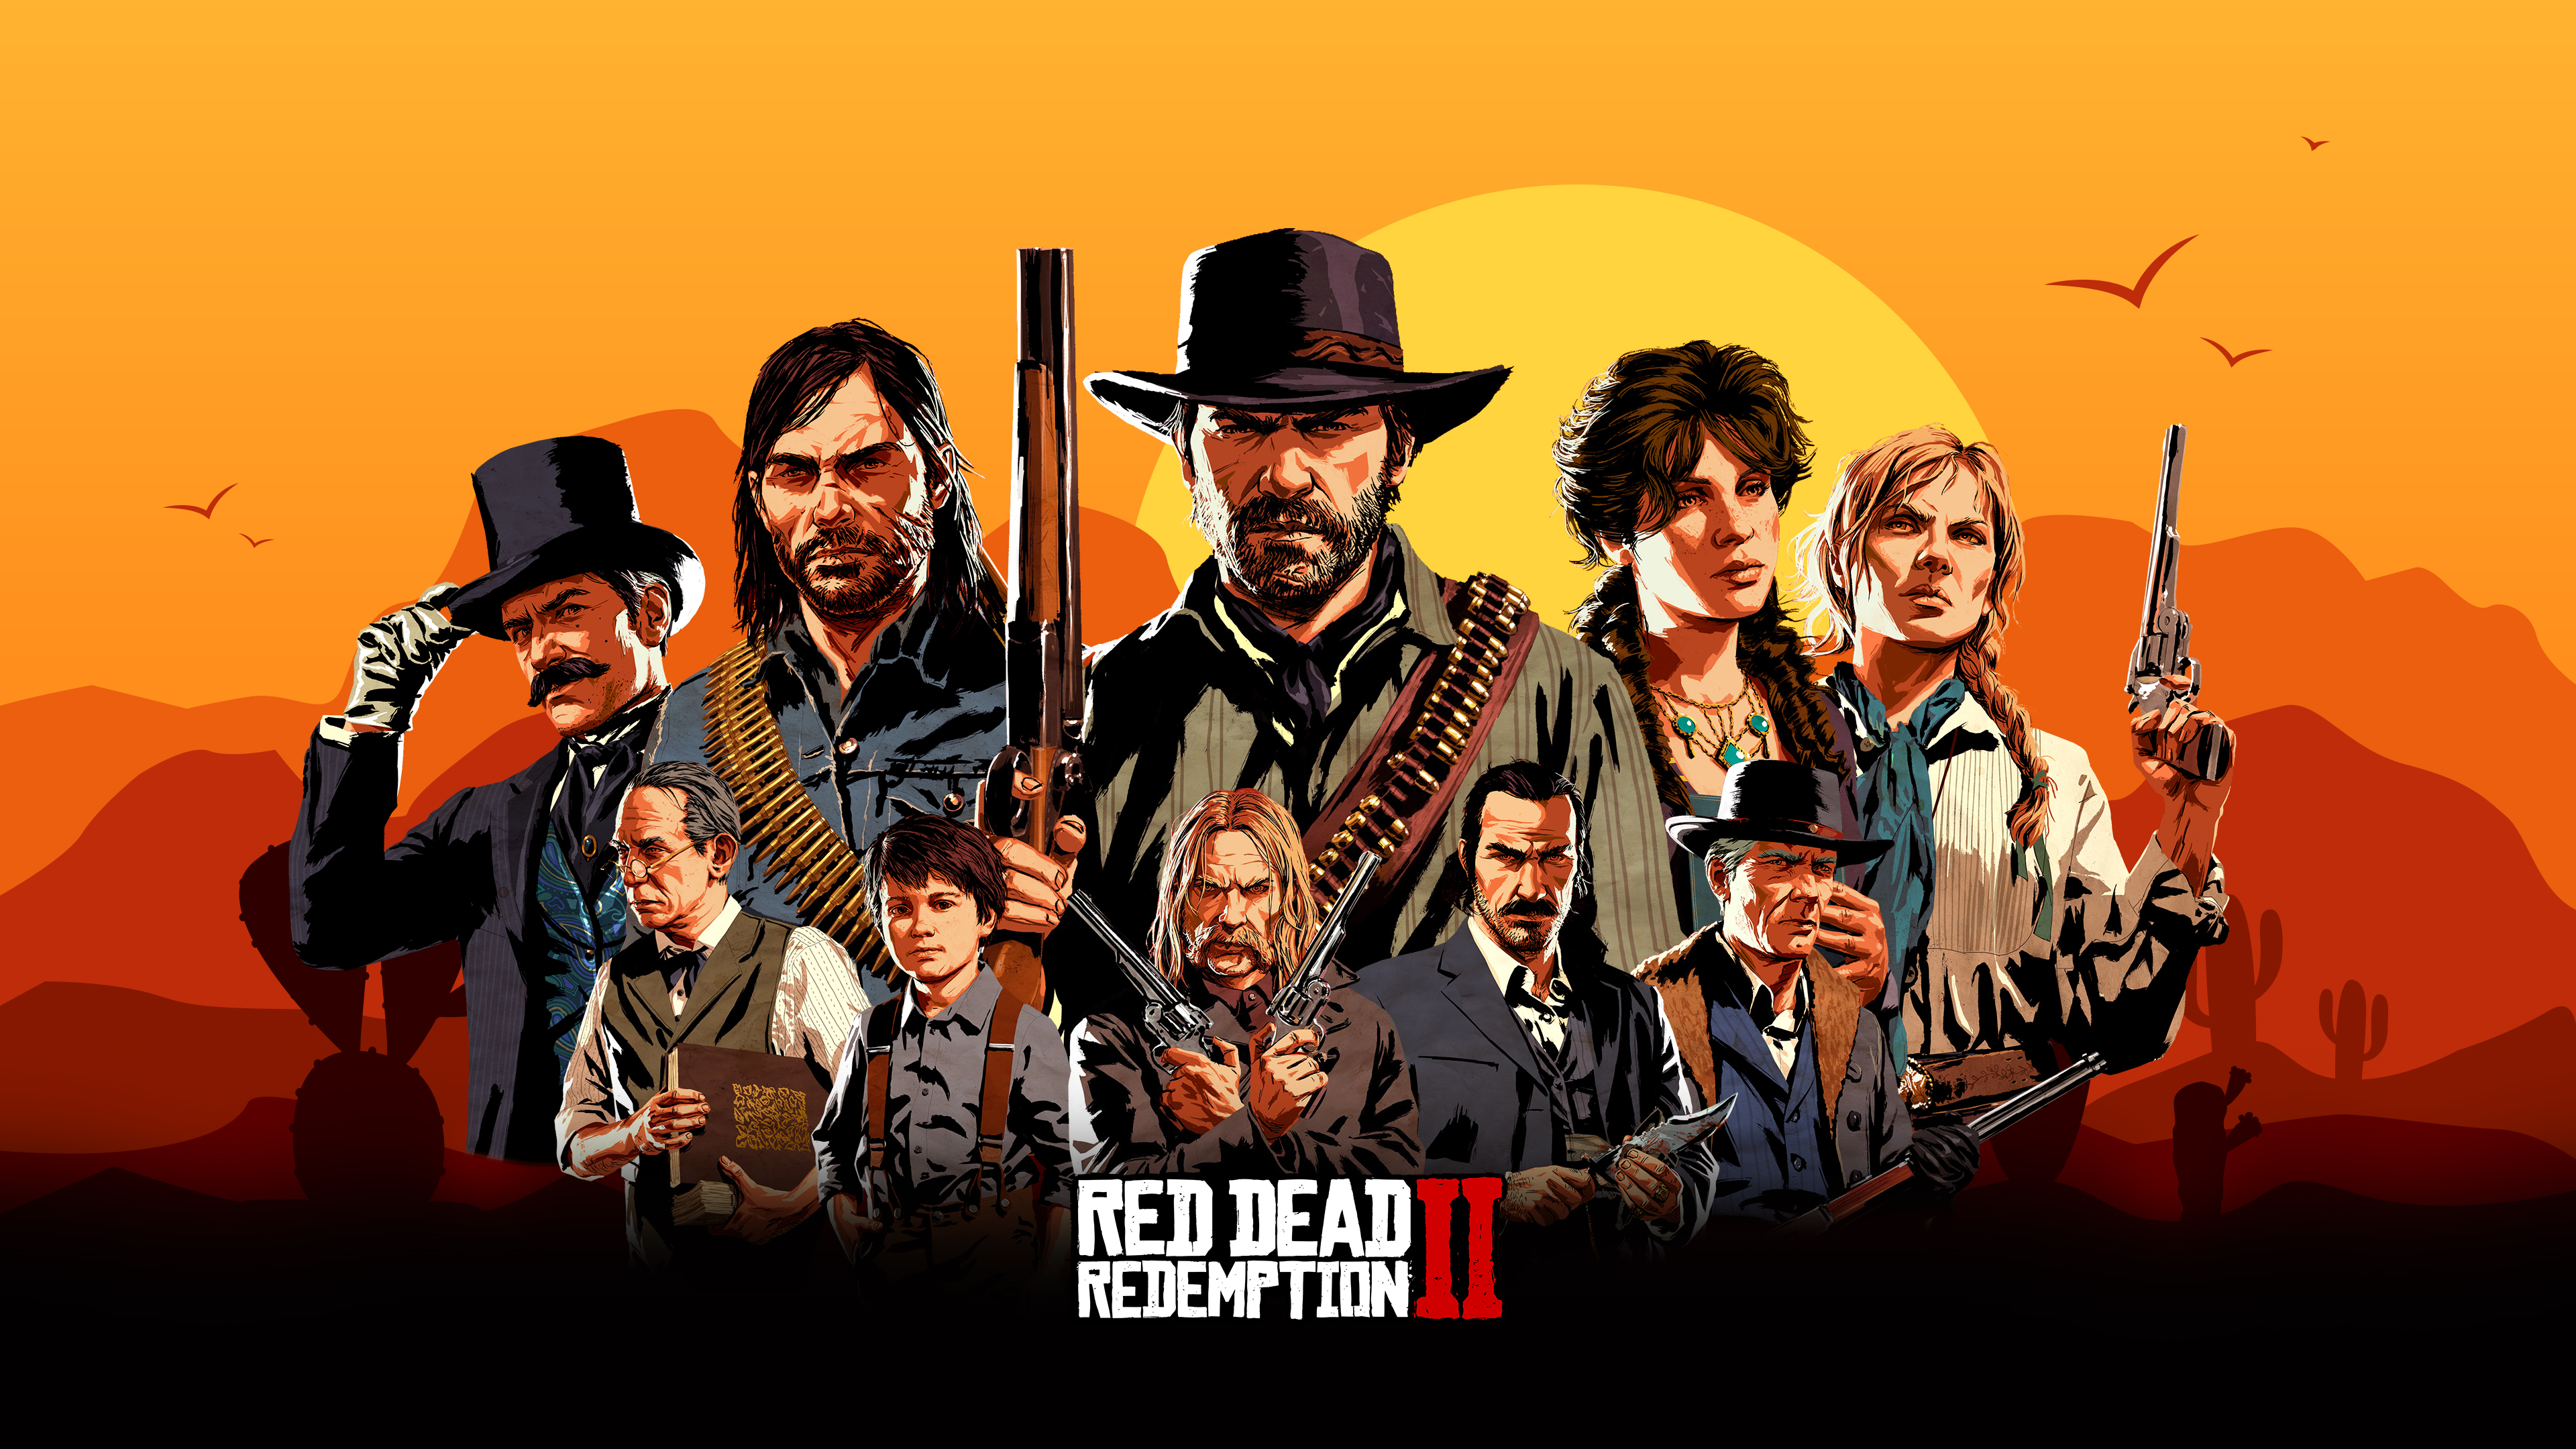 Red Dead Redemption 2 Square Wallpapers